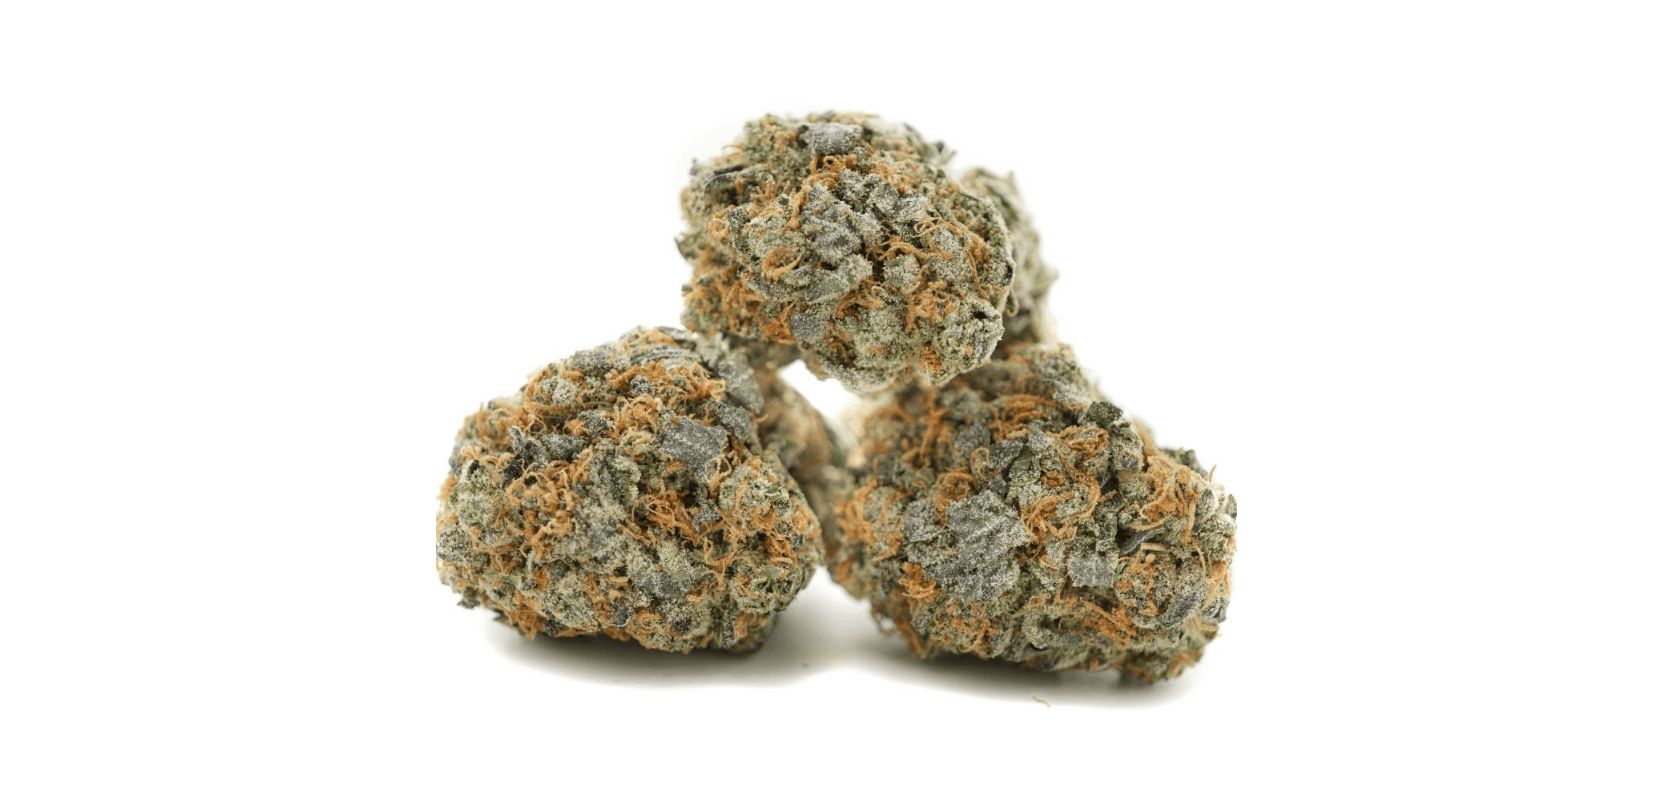 The Grease Monkey weed strain is for true canna connoisseurs. If you're a seasoned smoker who loves a good body buzz and some serious couch-lock action, then the Grease Monkey is ideal for you.